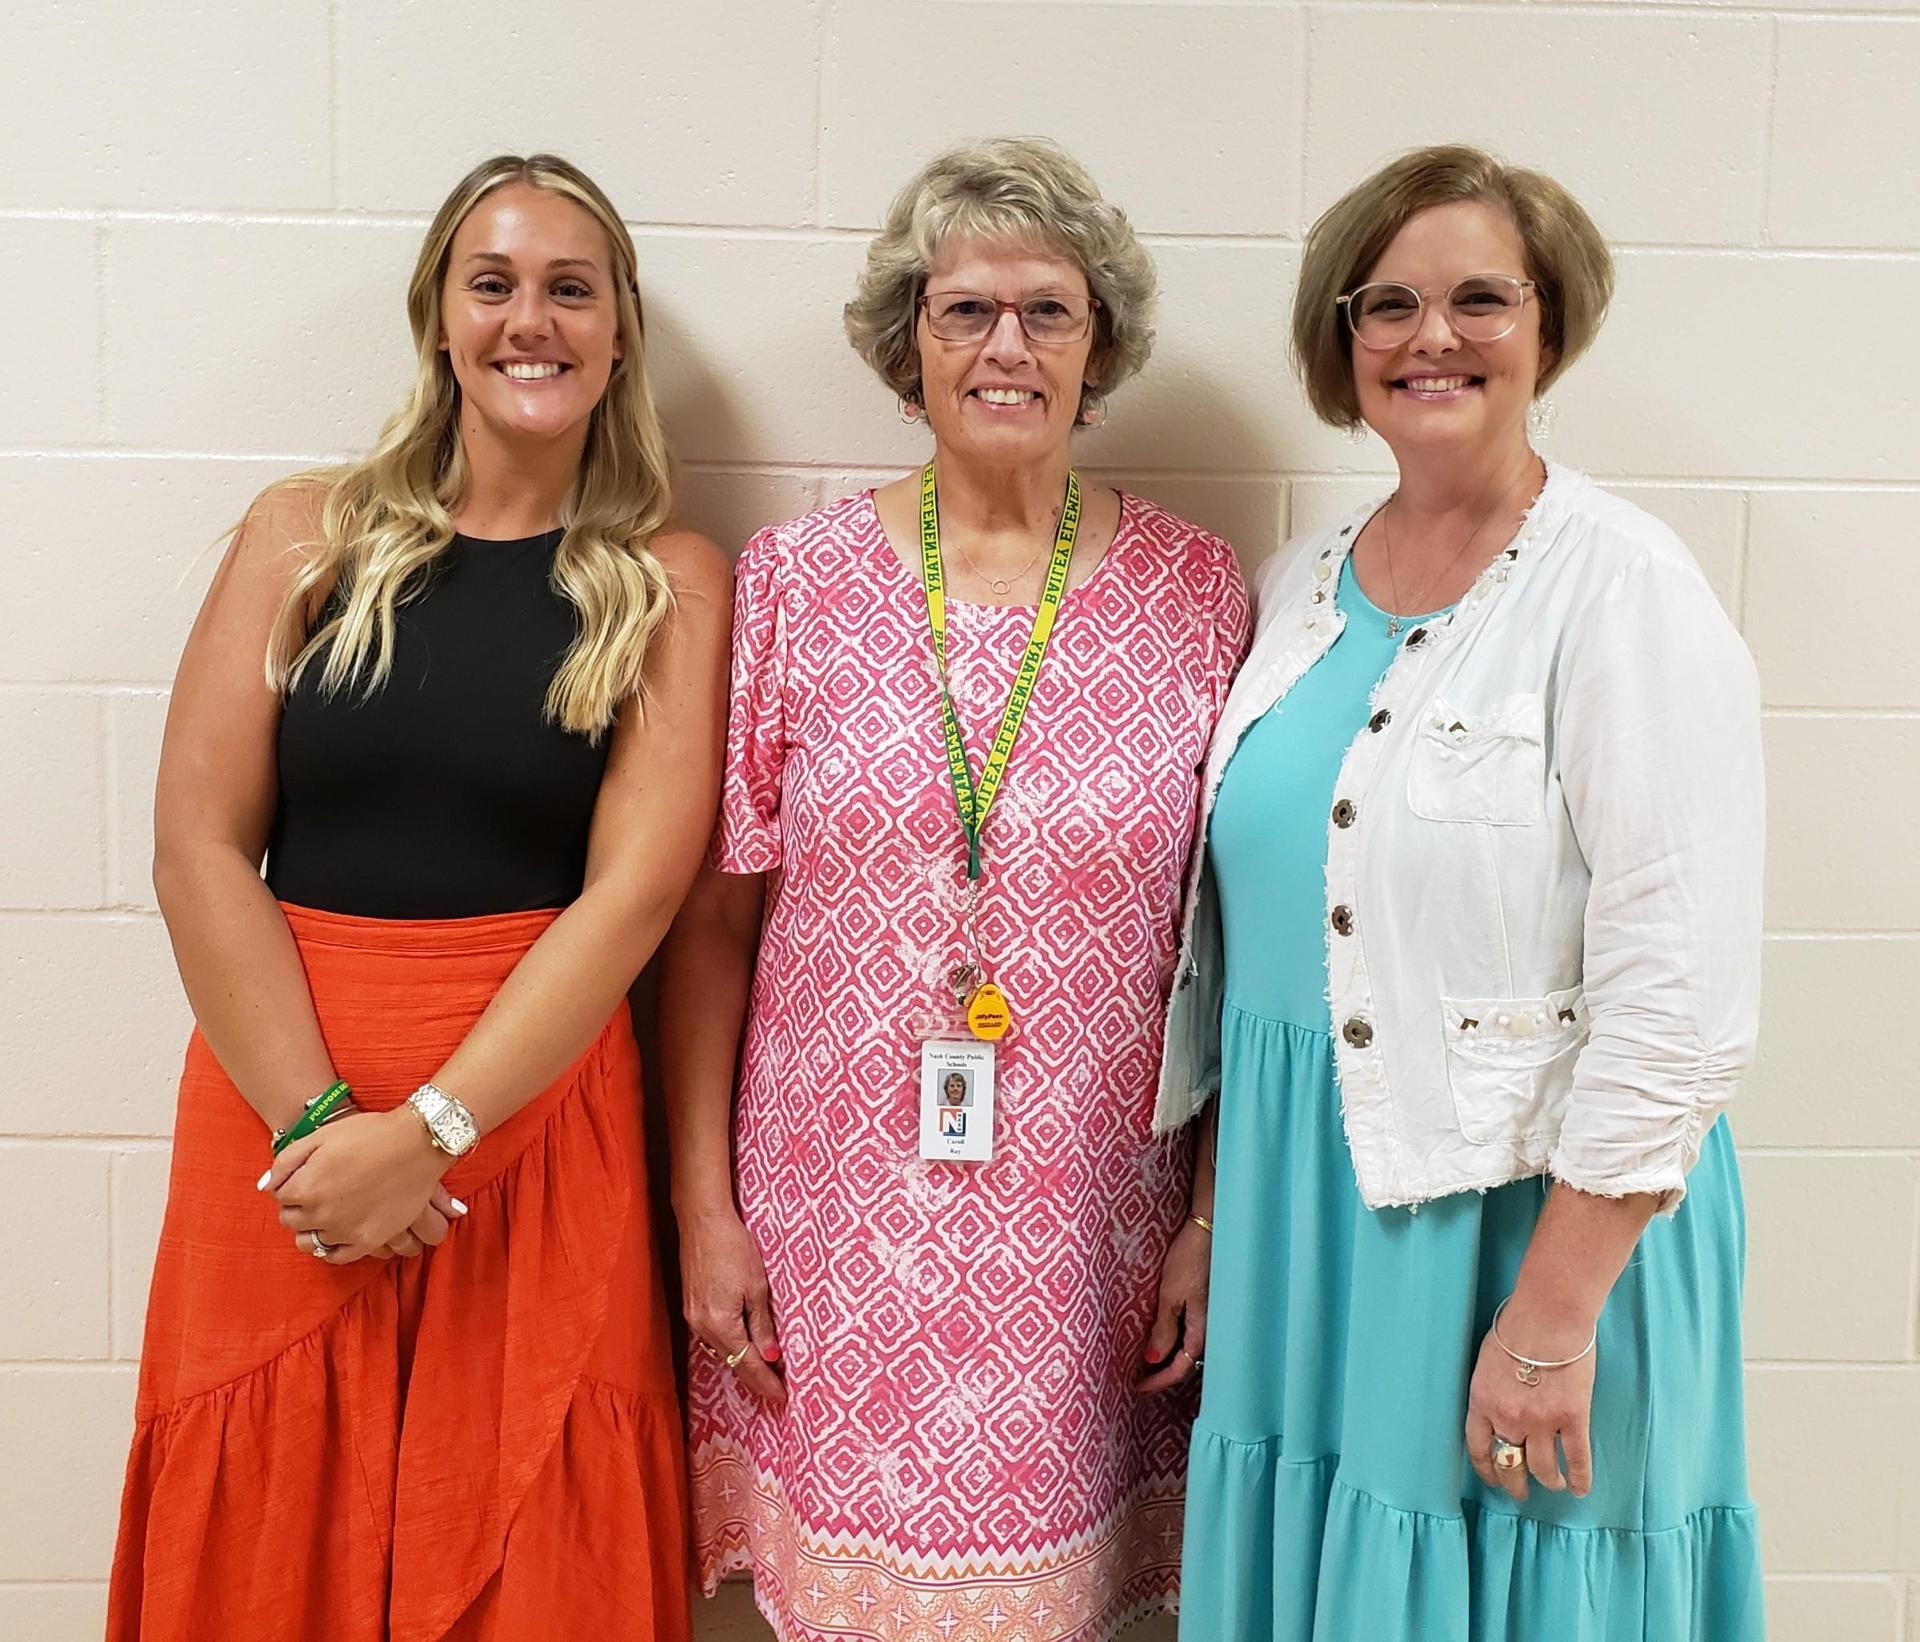 Ms. Leithead, Ms. Ray, Ms. Joyner standing for a group photo in the hallway